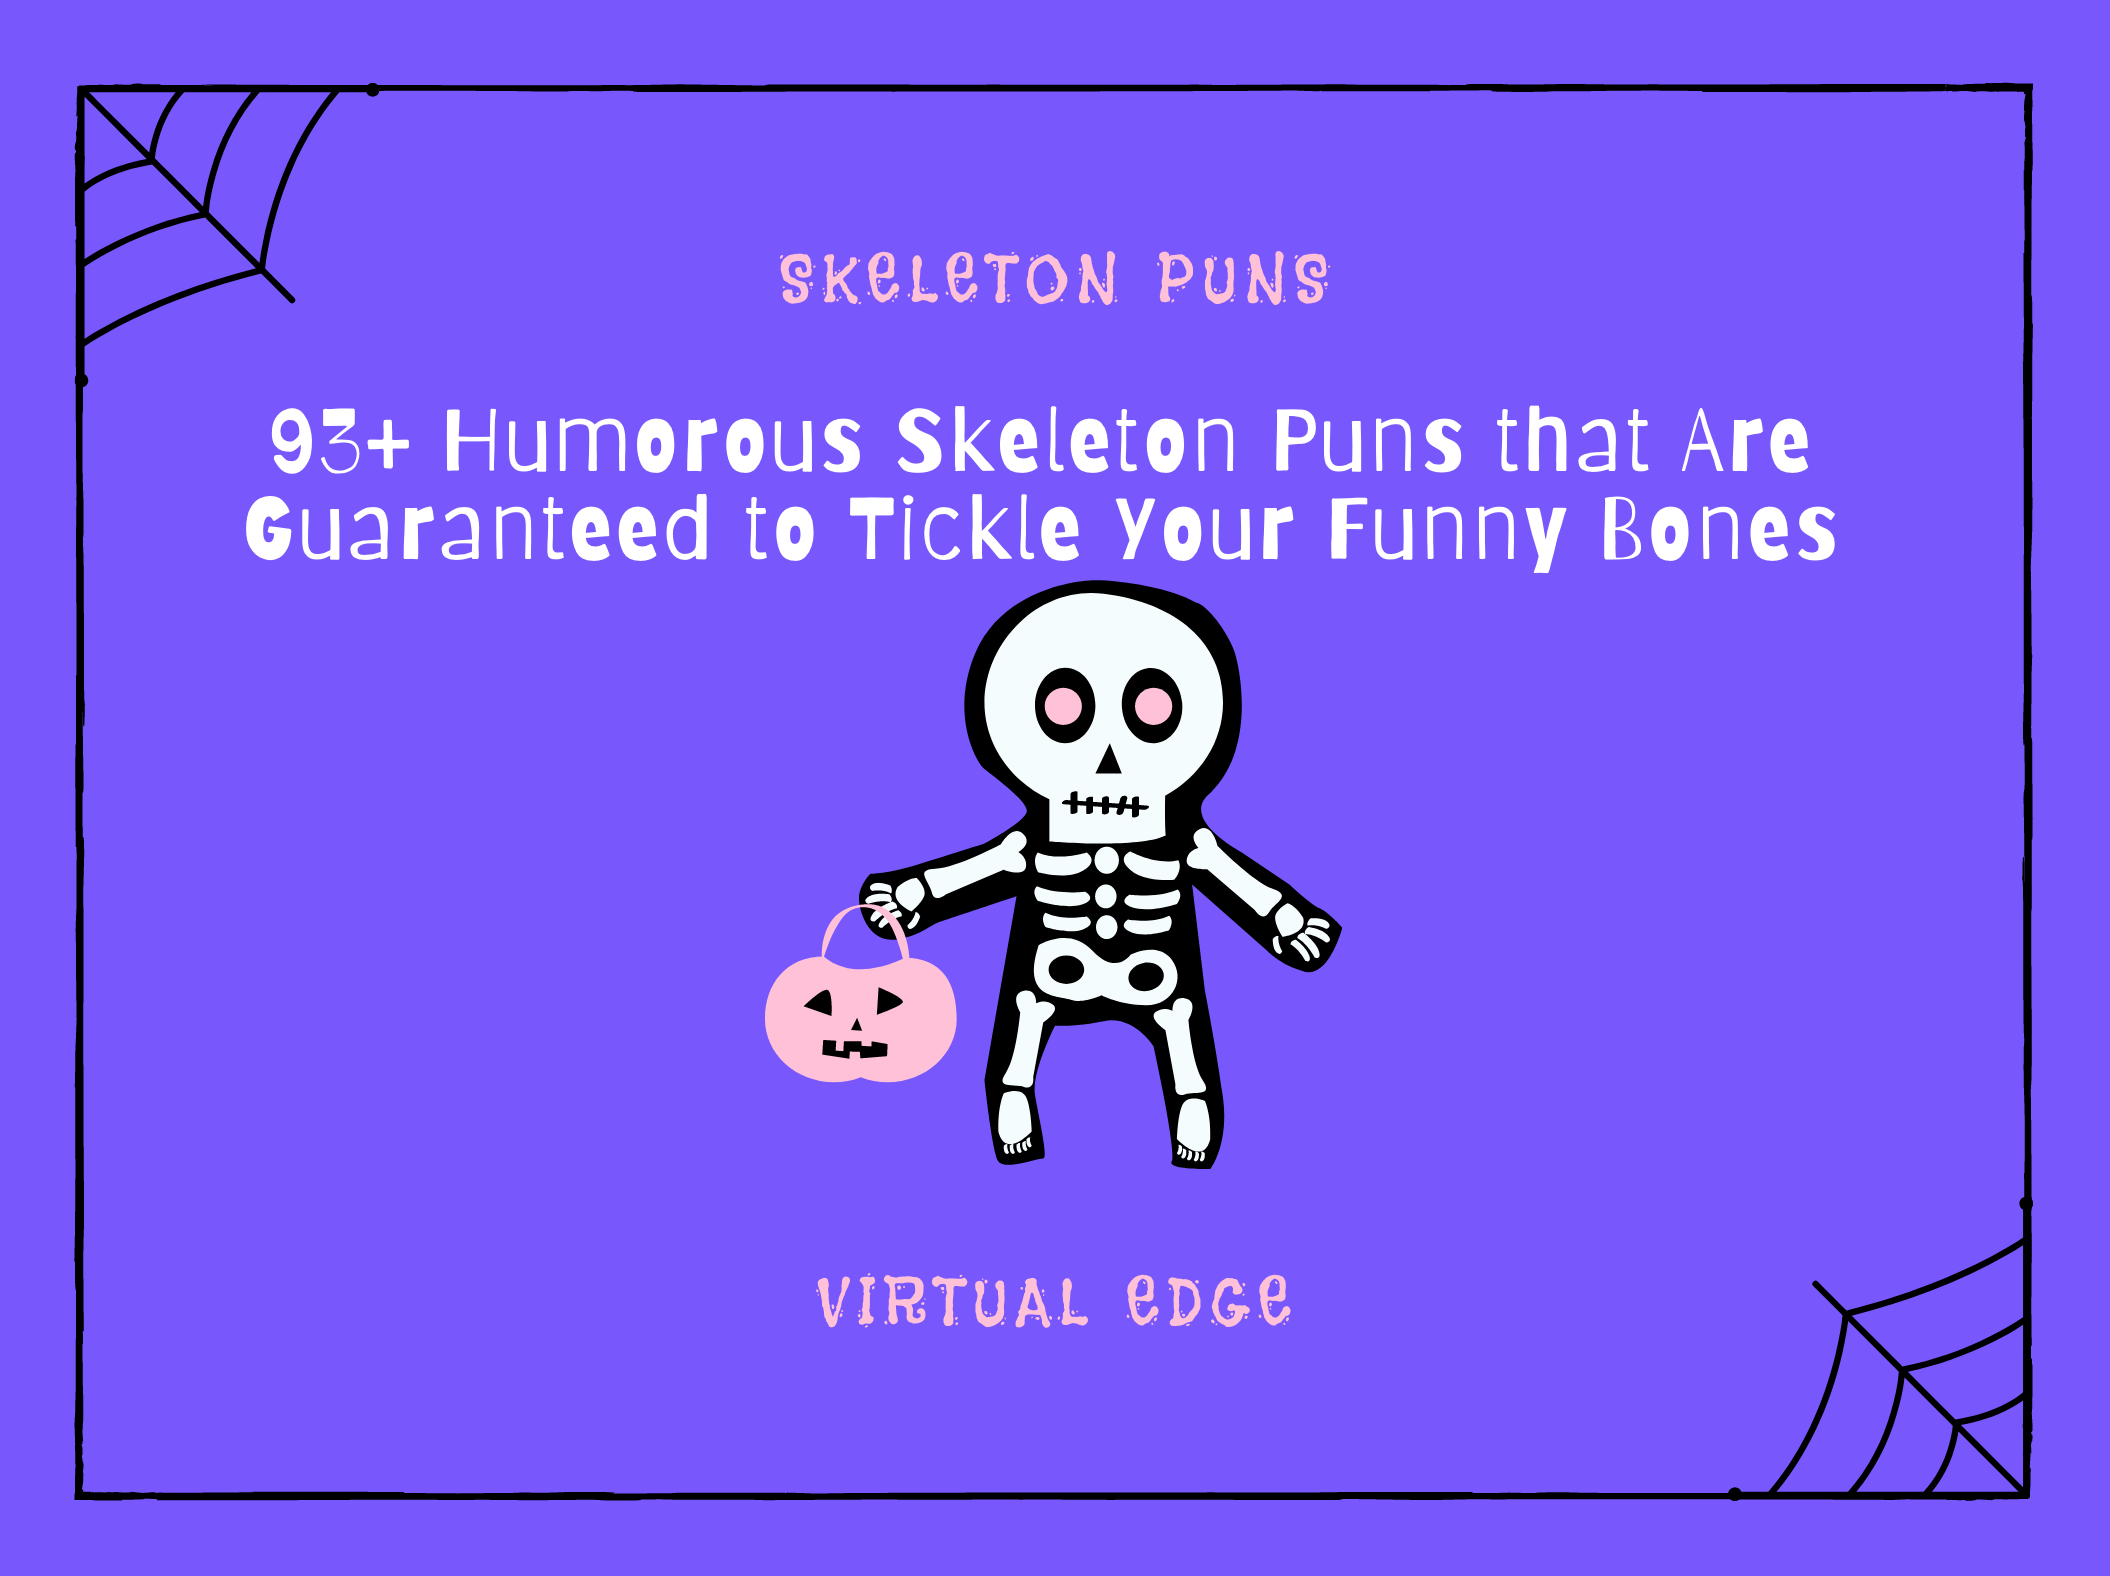 93+ Humorous Skeleton Puns that Are Guaranteed to Tickle Your Funny Bones